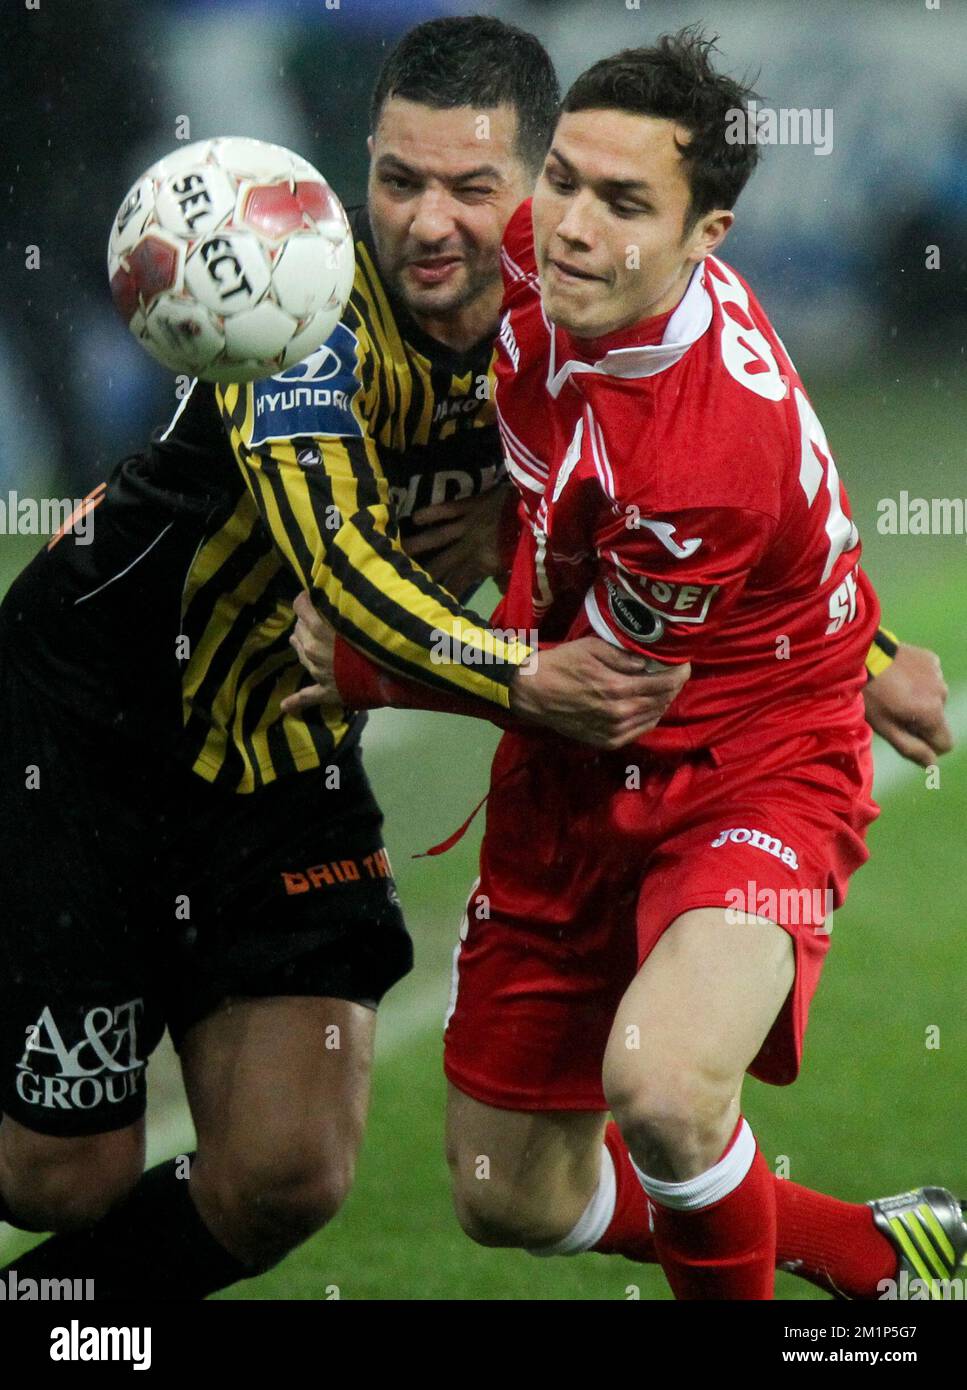 20121123 - LIEGE, BELGIUM: Lierse's Rachid Bourabia and Standard's Luis Manuel Seijas Gunther fight for the ball during the Jupiler Pro League match between Standard and Lierse, in Liege, Friday 23 November 2012, on day 17 of the Belgian soccer championship. BELGA PHOTO VIRGINIE LEFOUR Stock Photo